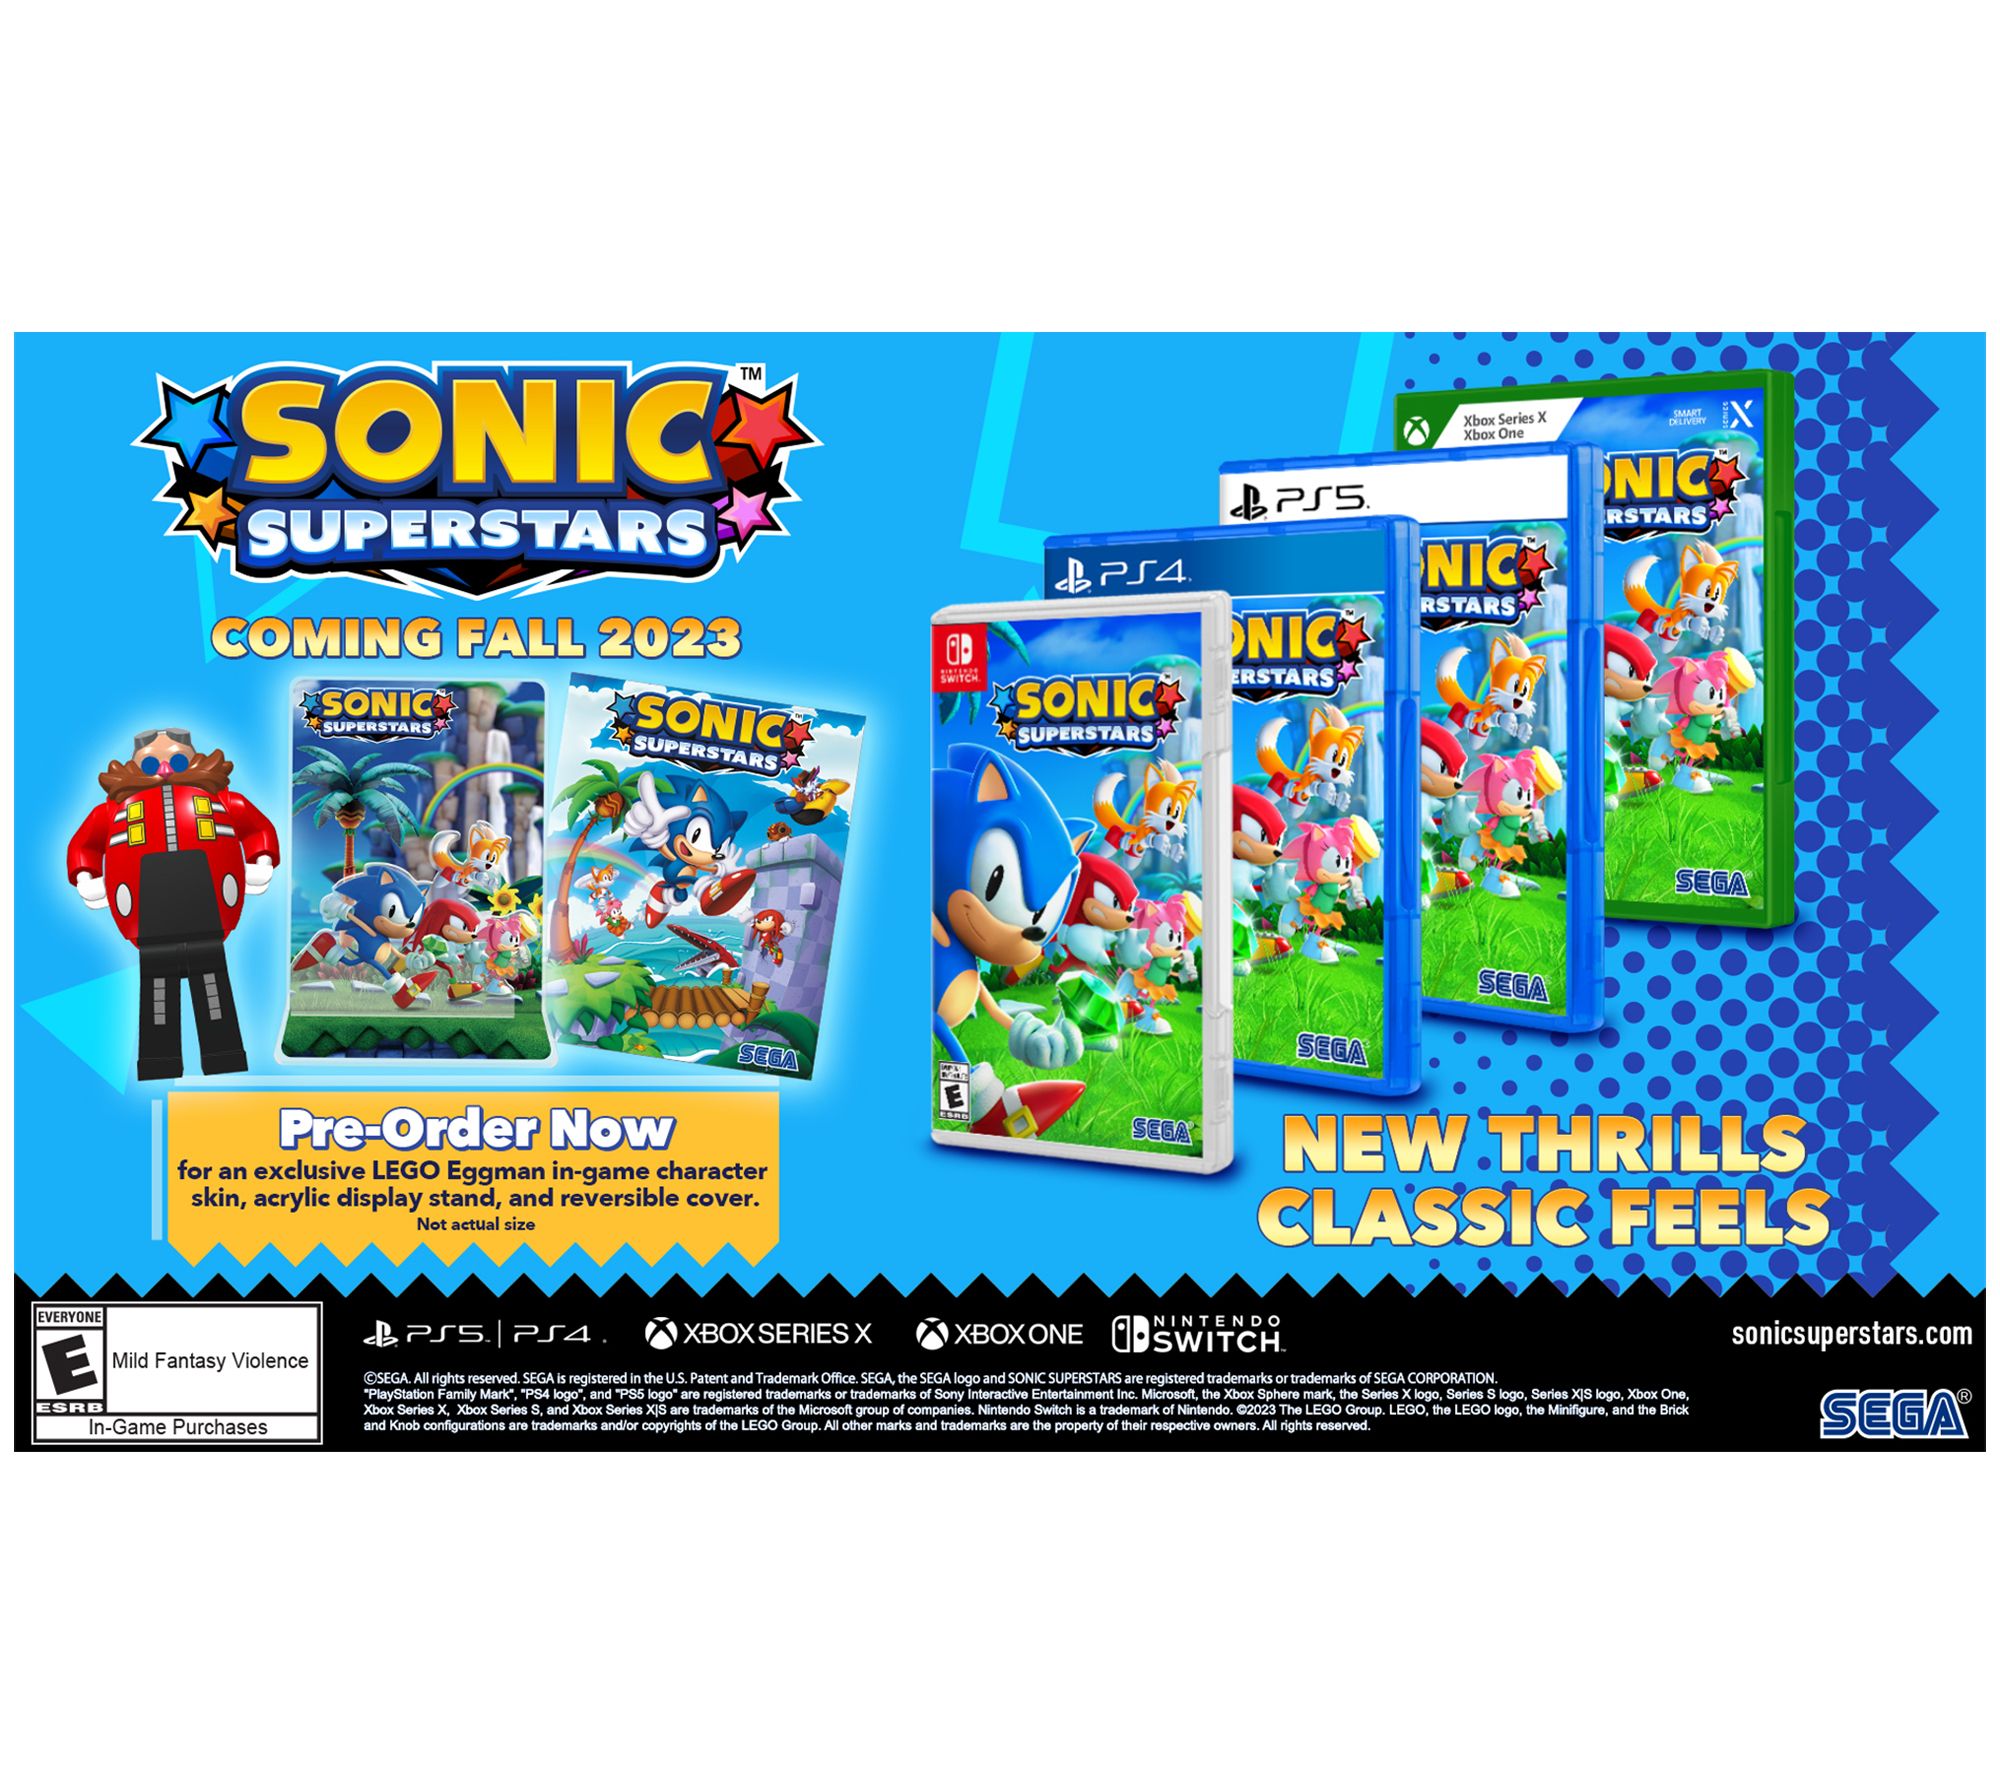 Sonic Superstars available now for Nintendo Switch